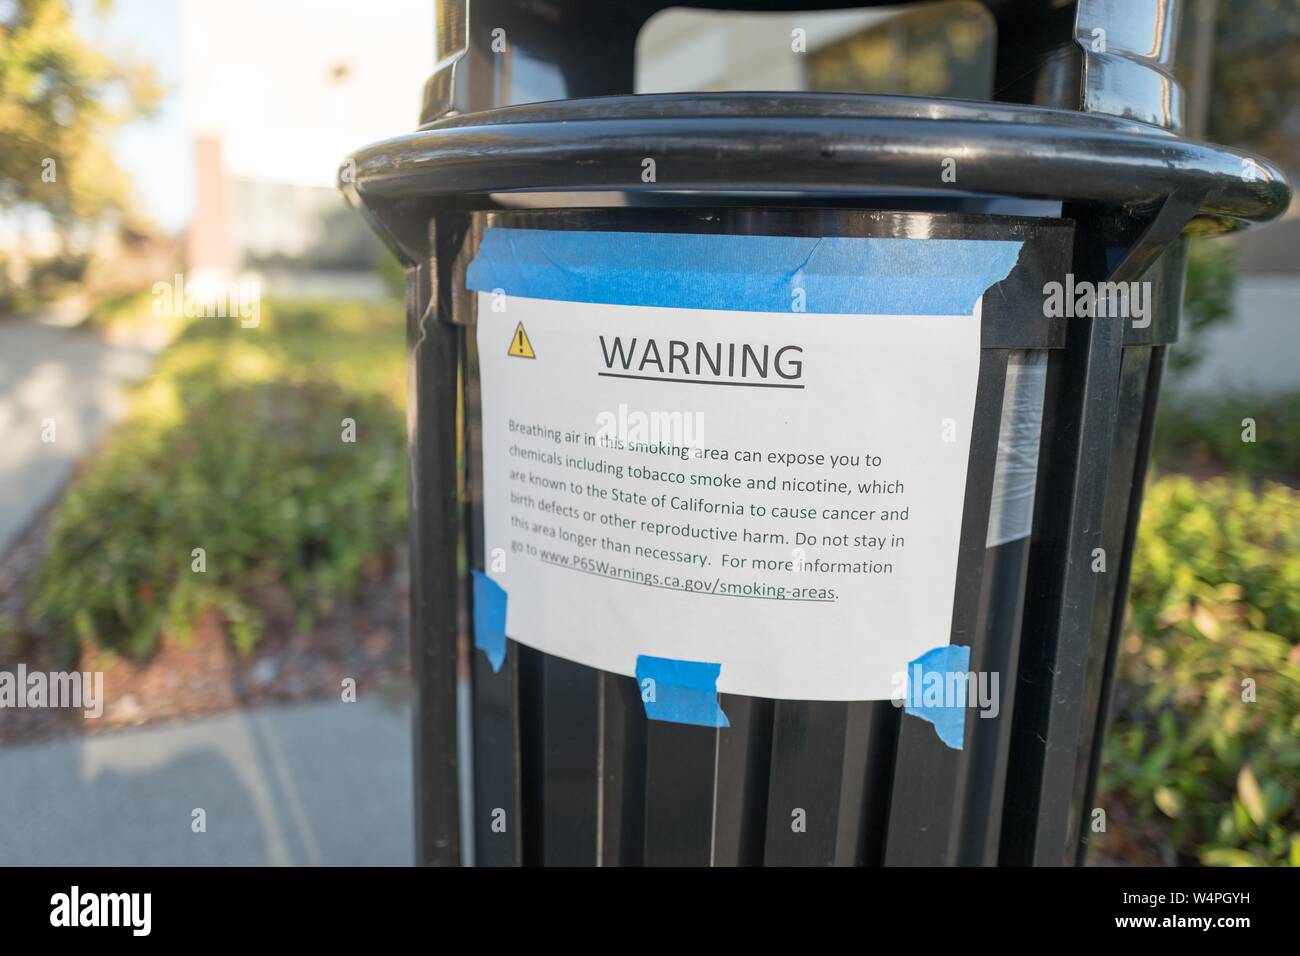 https://c8.alamy.com/comp/W4PGYH/printed-proposition-65-warning-affixed-to-the-side-of-an-outdoor-trash-can-in-an-office-park-on-alameda-island-alameda-california-warning-that-the-area-may-be-contained-with-tobacco-smoke-due-to-being-a-designated-smoking-area-september-10-2018-W4PGYH.jpg